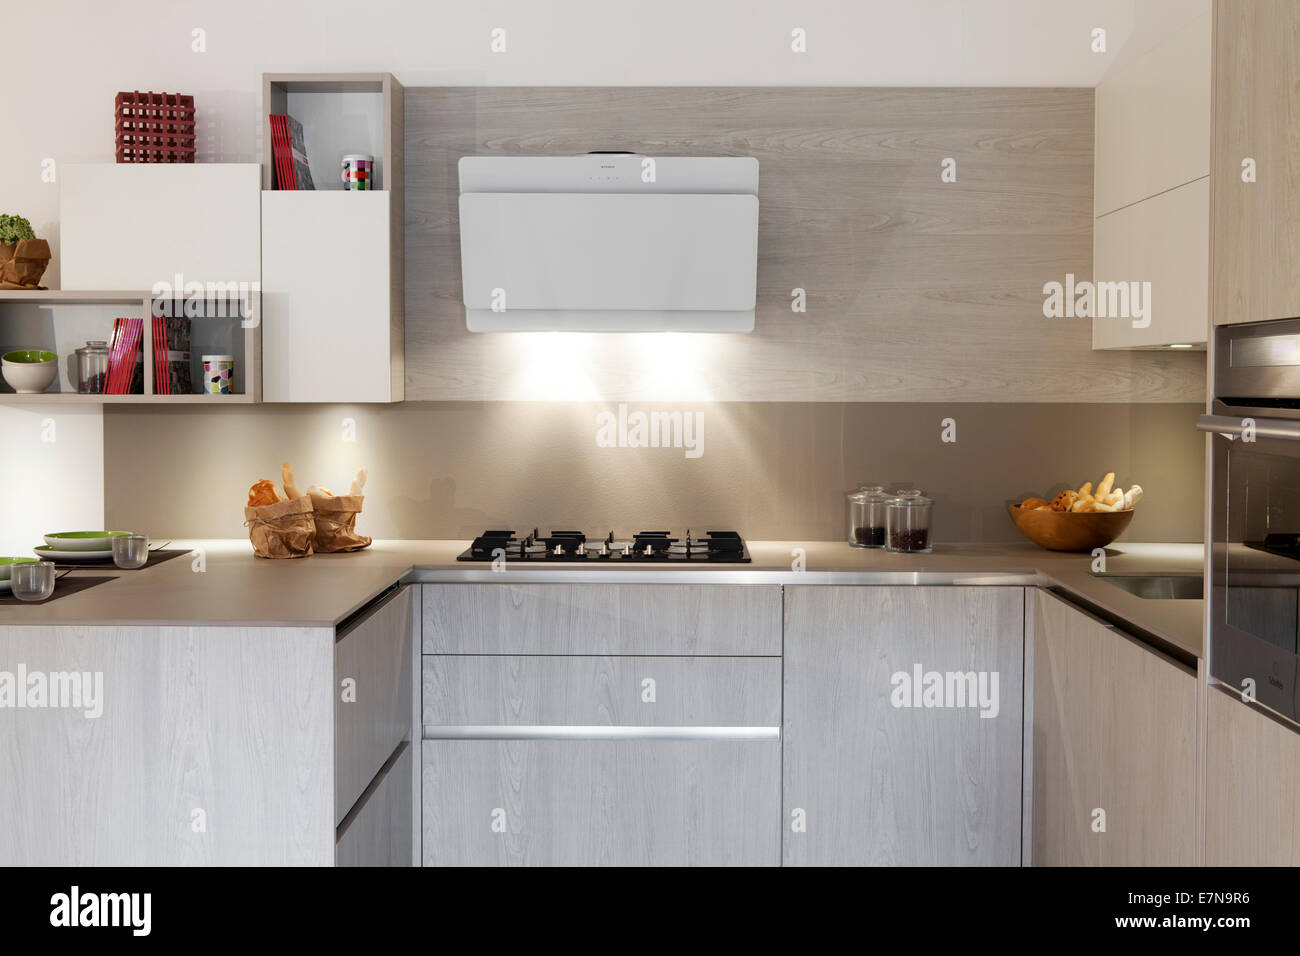 Kitchen cabinets and shelves in modern interior Stock Photo